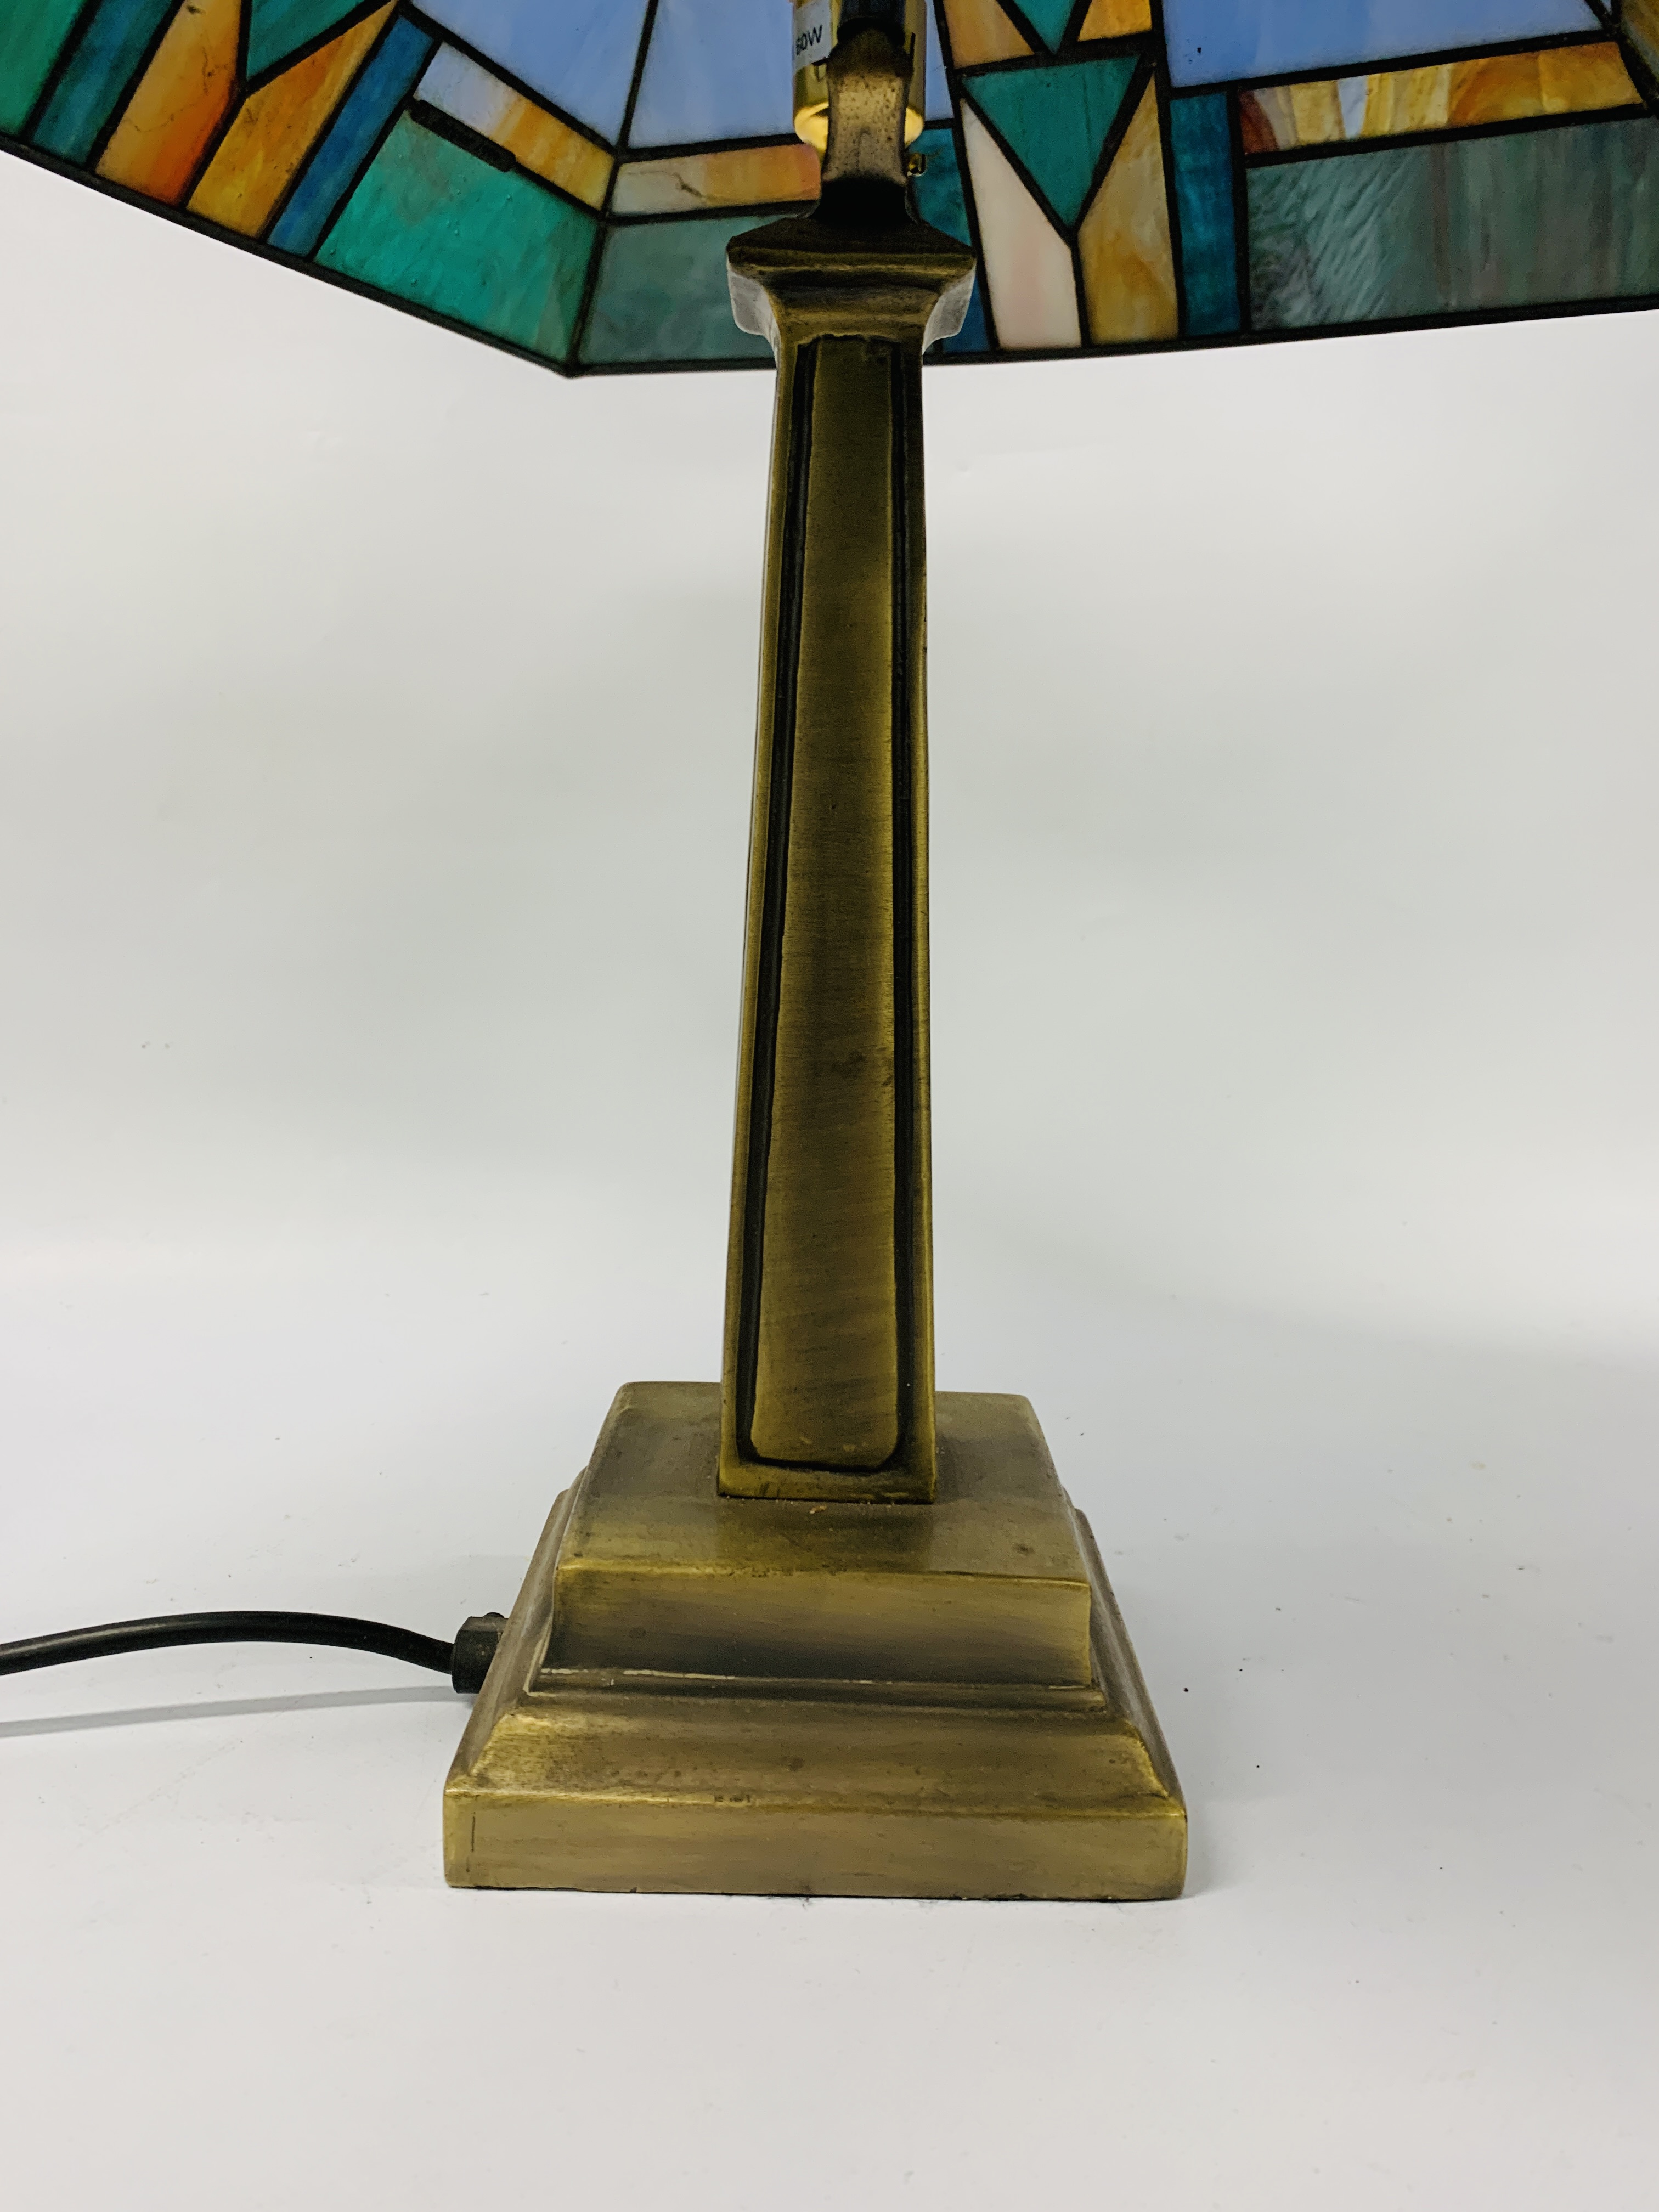 REPRODUCTION TIFFANY STYLE TABLE LAMP WITH SQUARE STAIN GLASS SHADE HEIGHT 50CM - SOLD AS SEEN. - Image 2 of 5